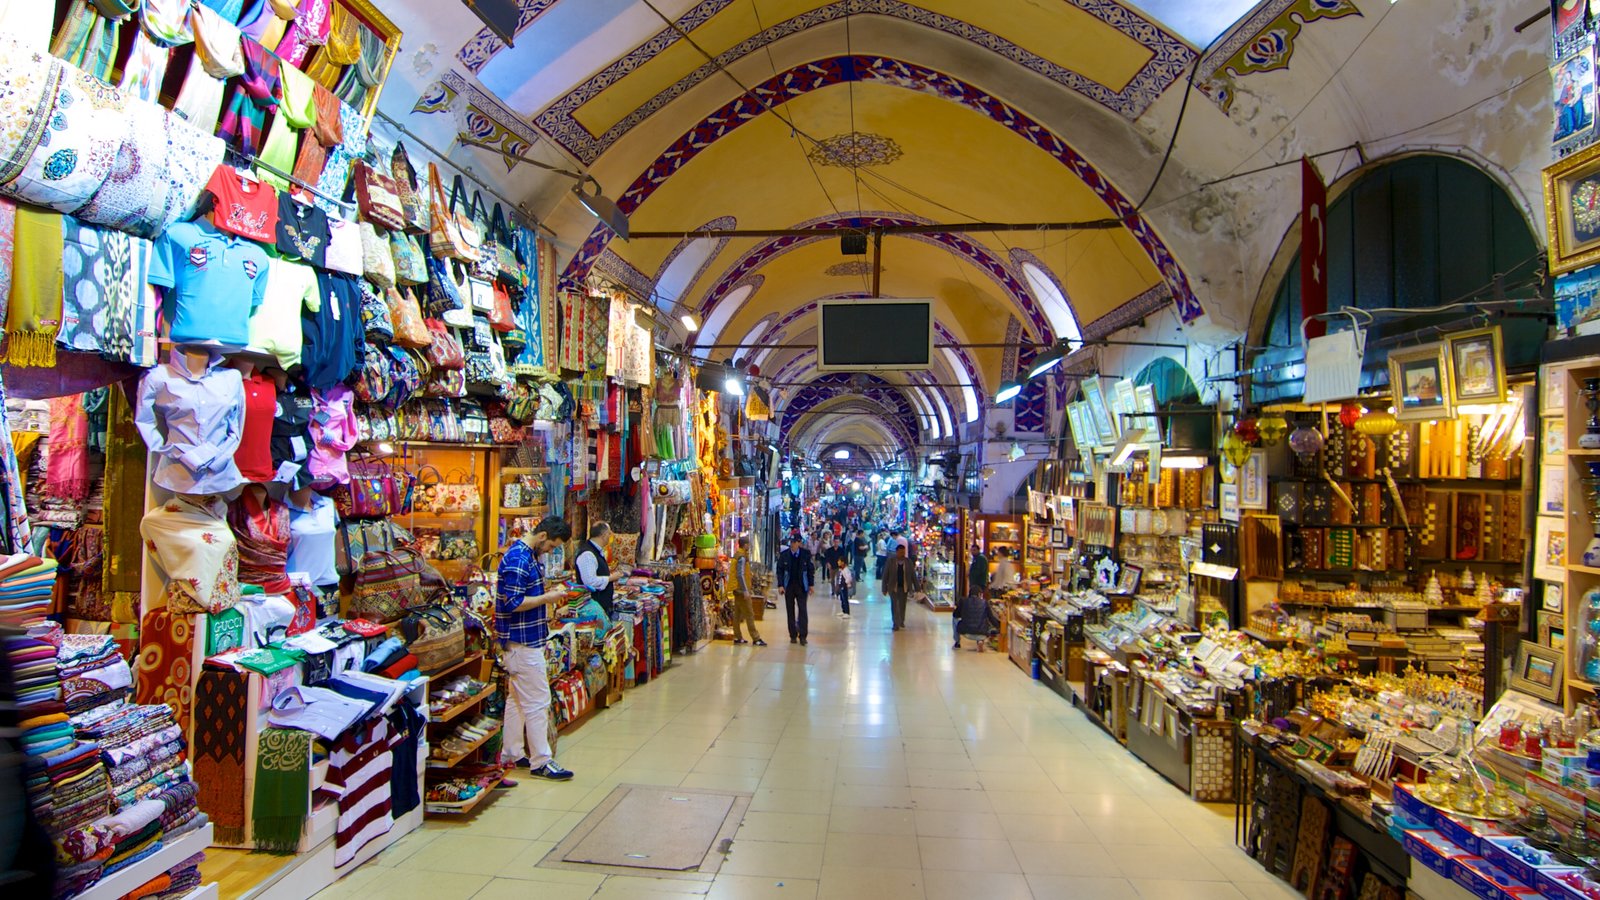 Grand Bazaar Tours | Istanbul Shopping Tours | Istanbul.com